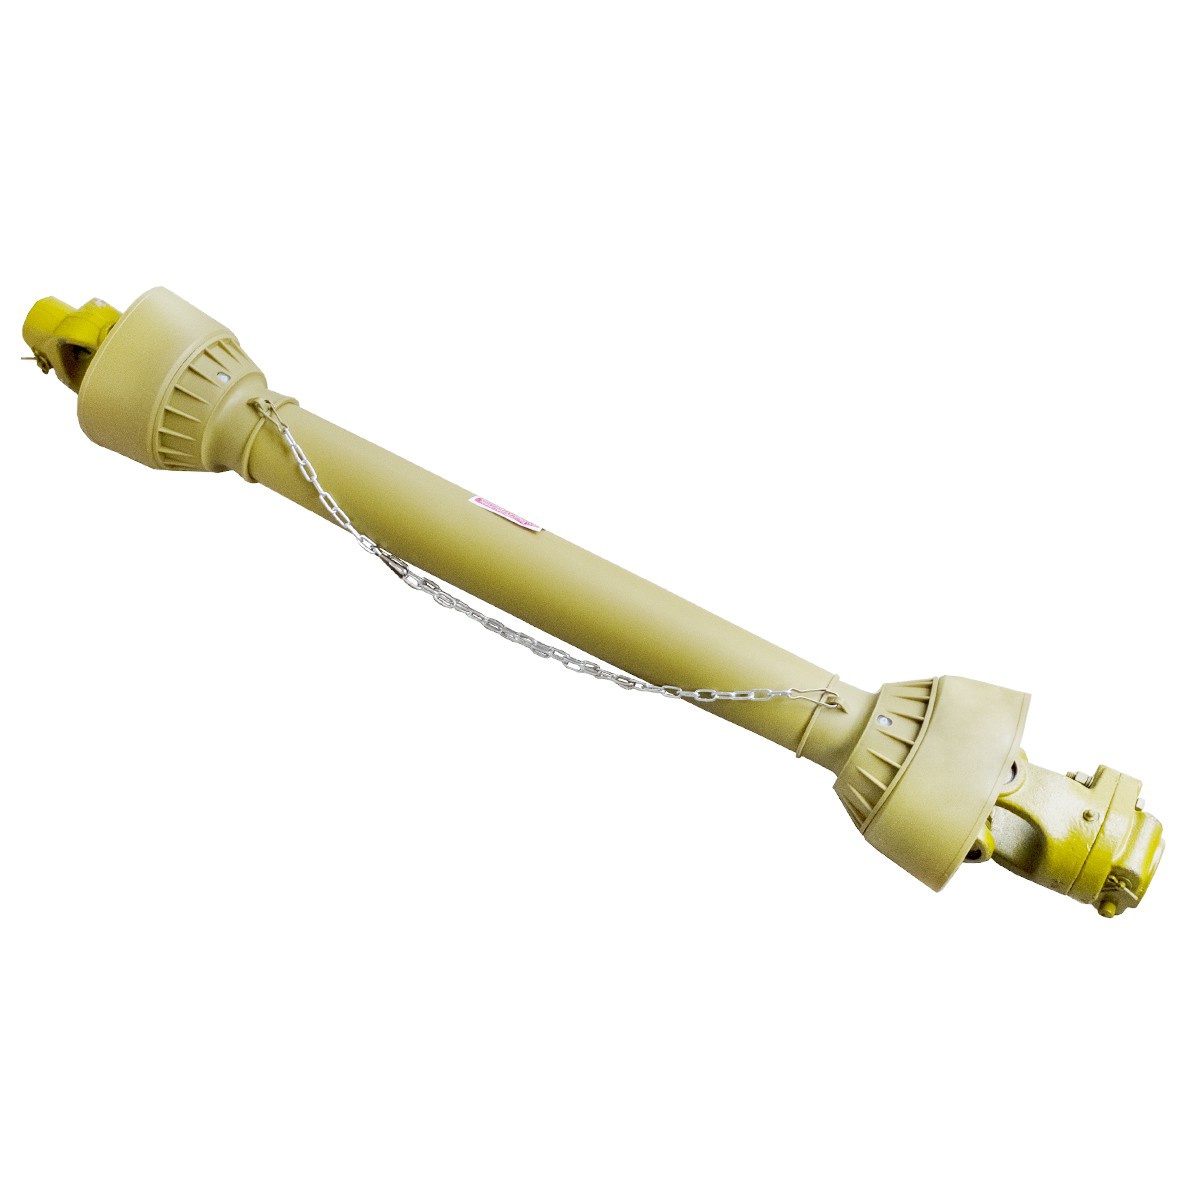 065b 60 100km approximately 900nm - PTO shaft with breakaway wedge 065B - 110 cm / up to 100 HP